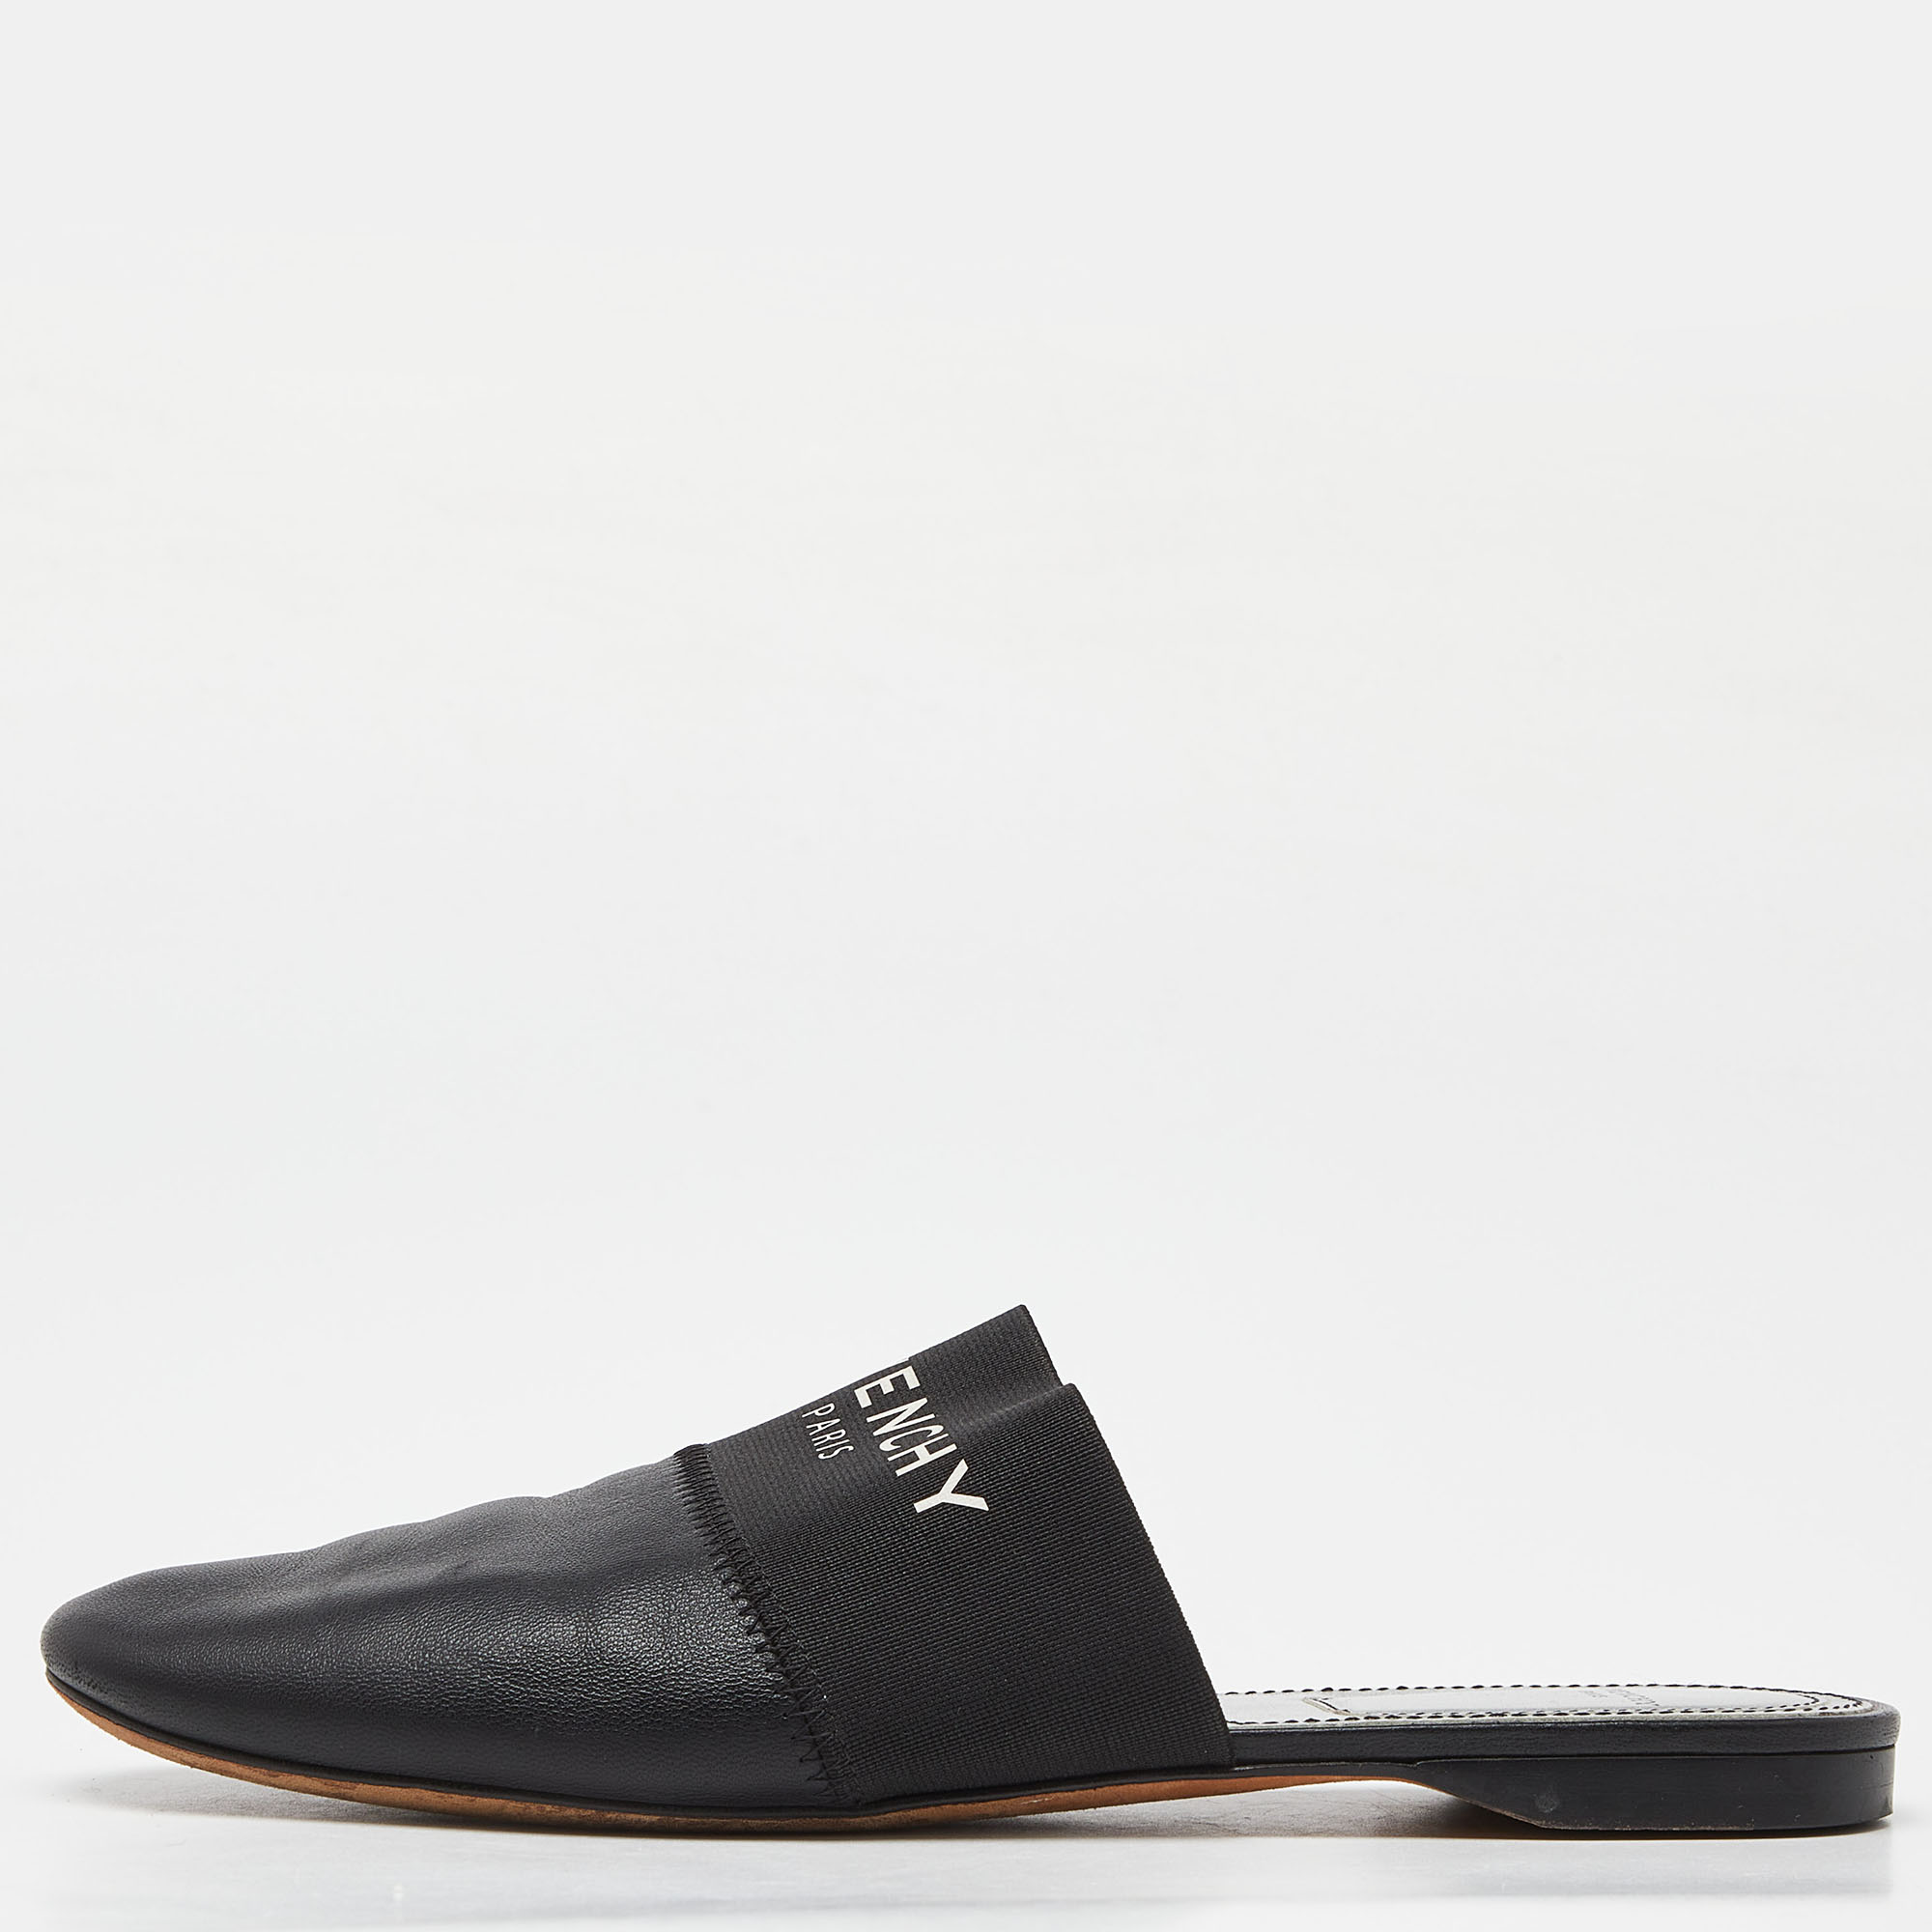 

Givenchy Black Leather Bedford Flat Mules Size